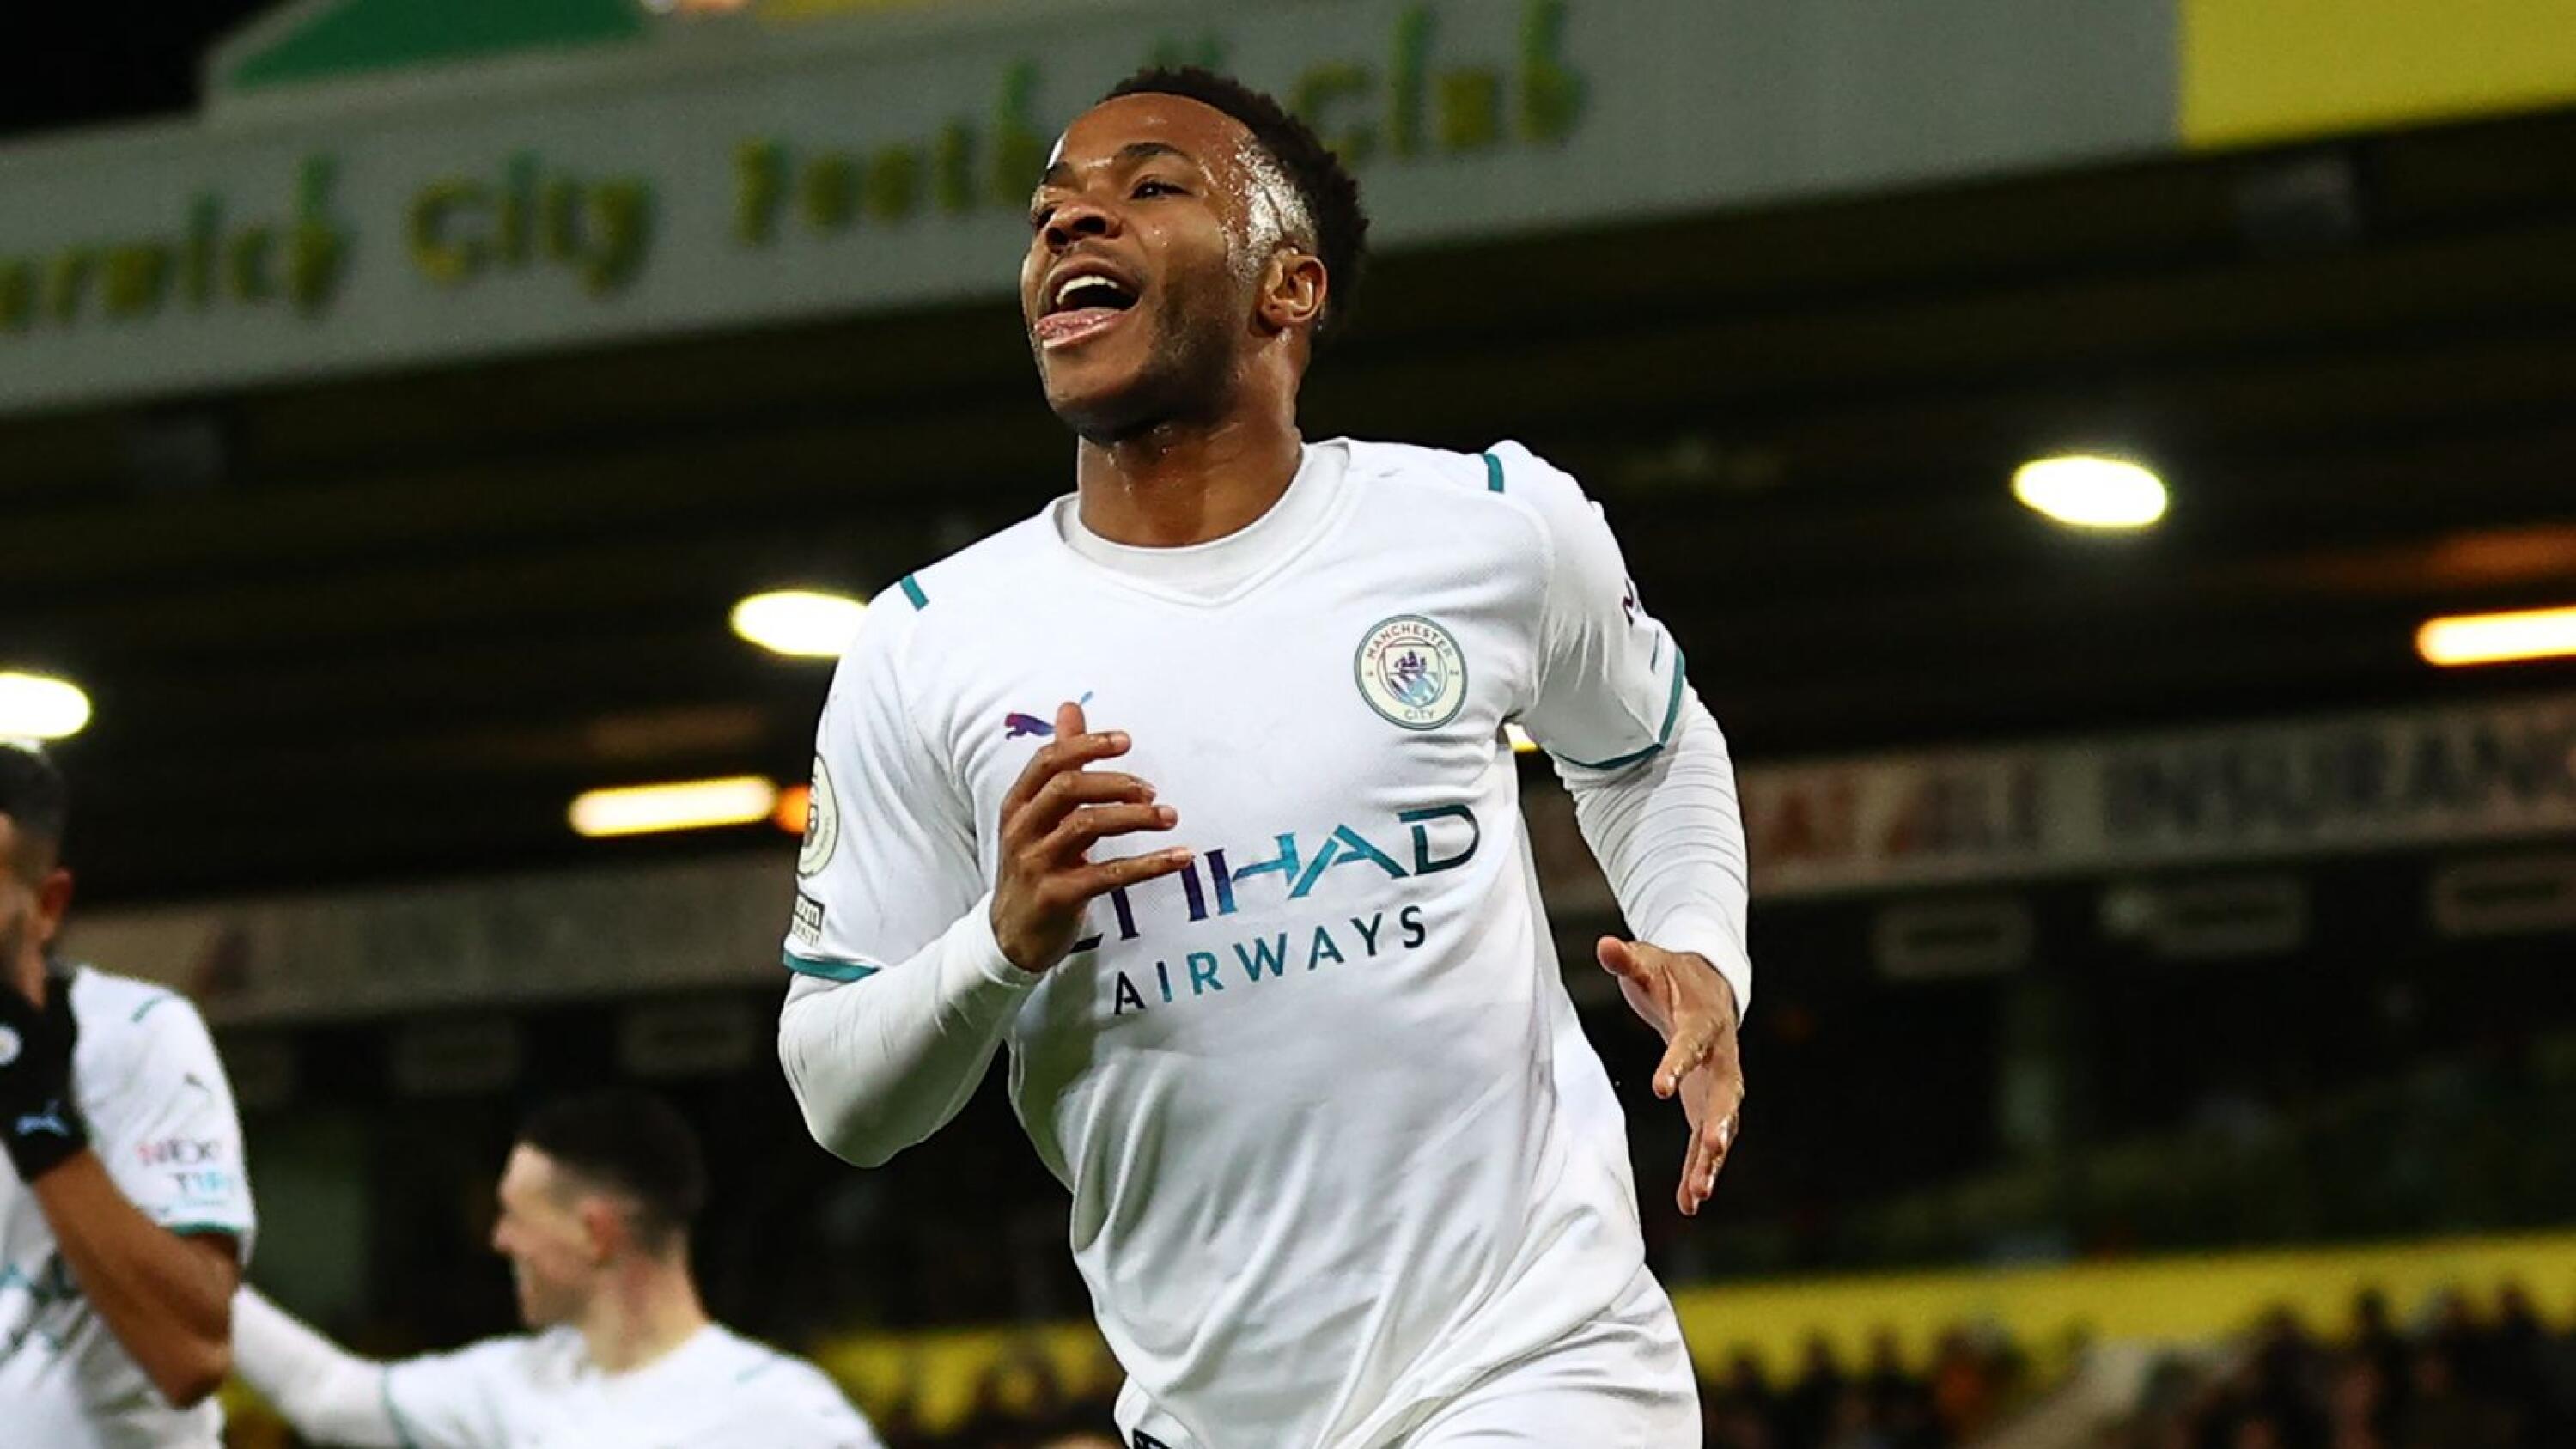 Manchester City's English midfielder Raheem Sterling celebrates after scoring the opening goal during their English Premier League football match against Norwich City at Carrow Road Stadium in Norwich on Saturday